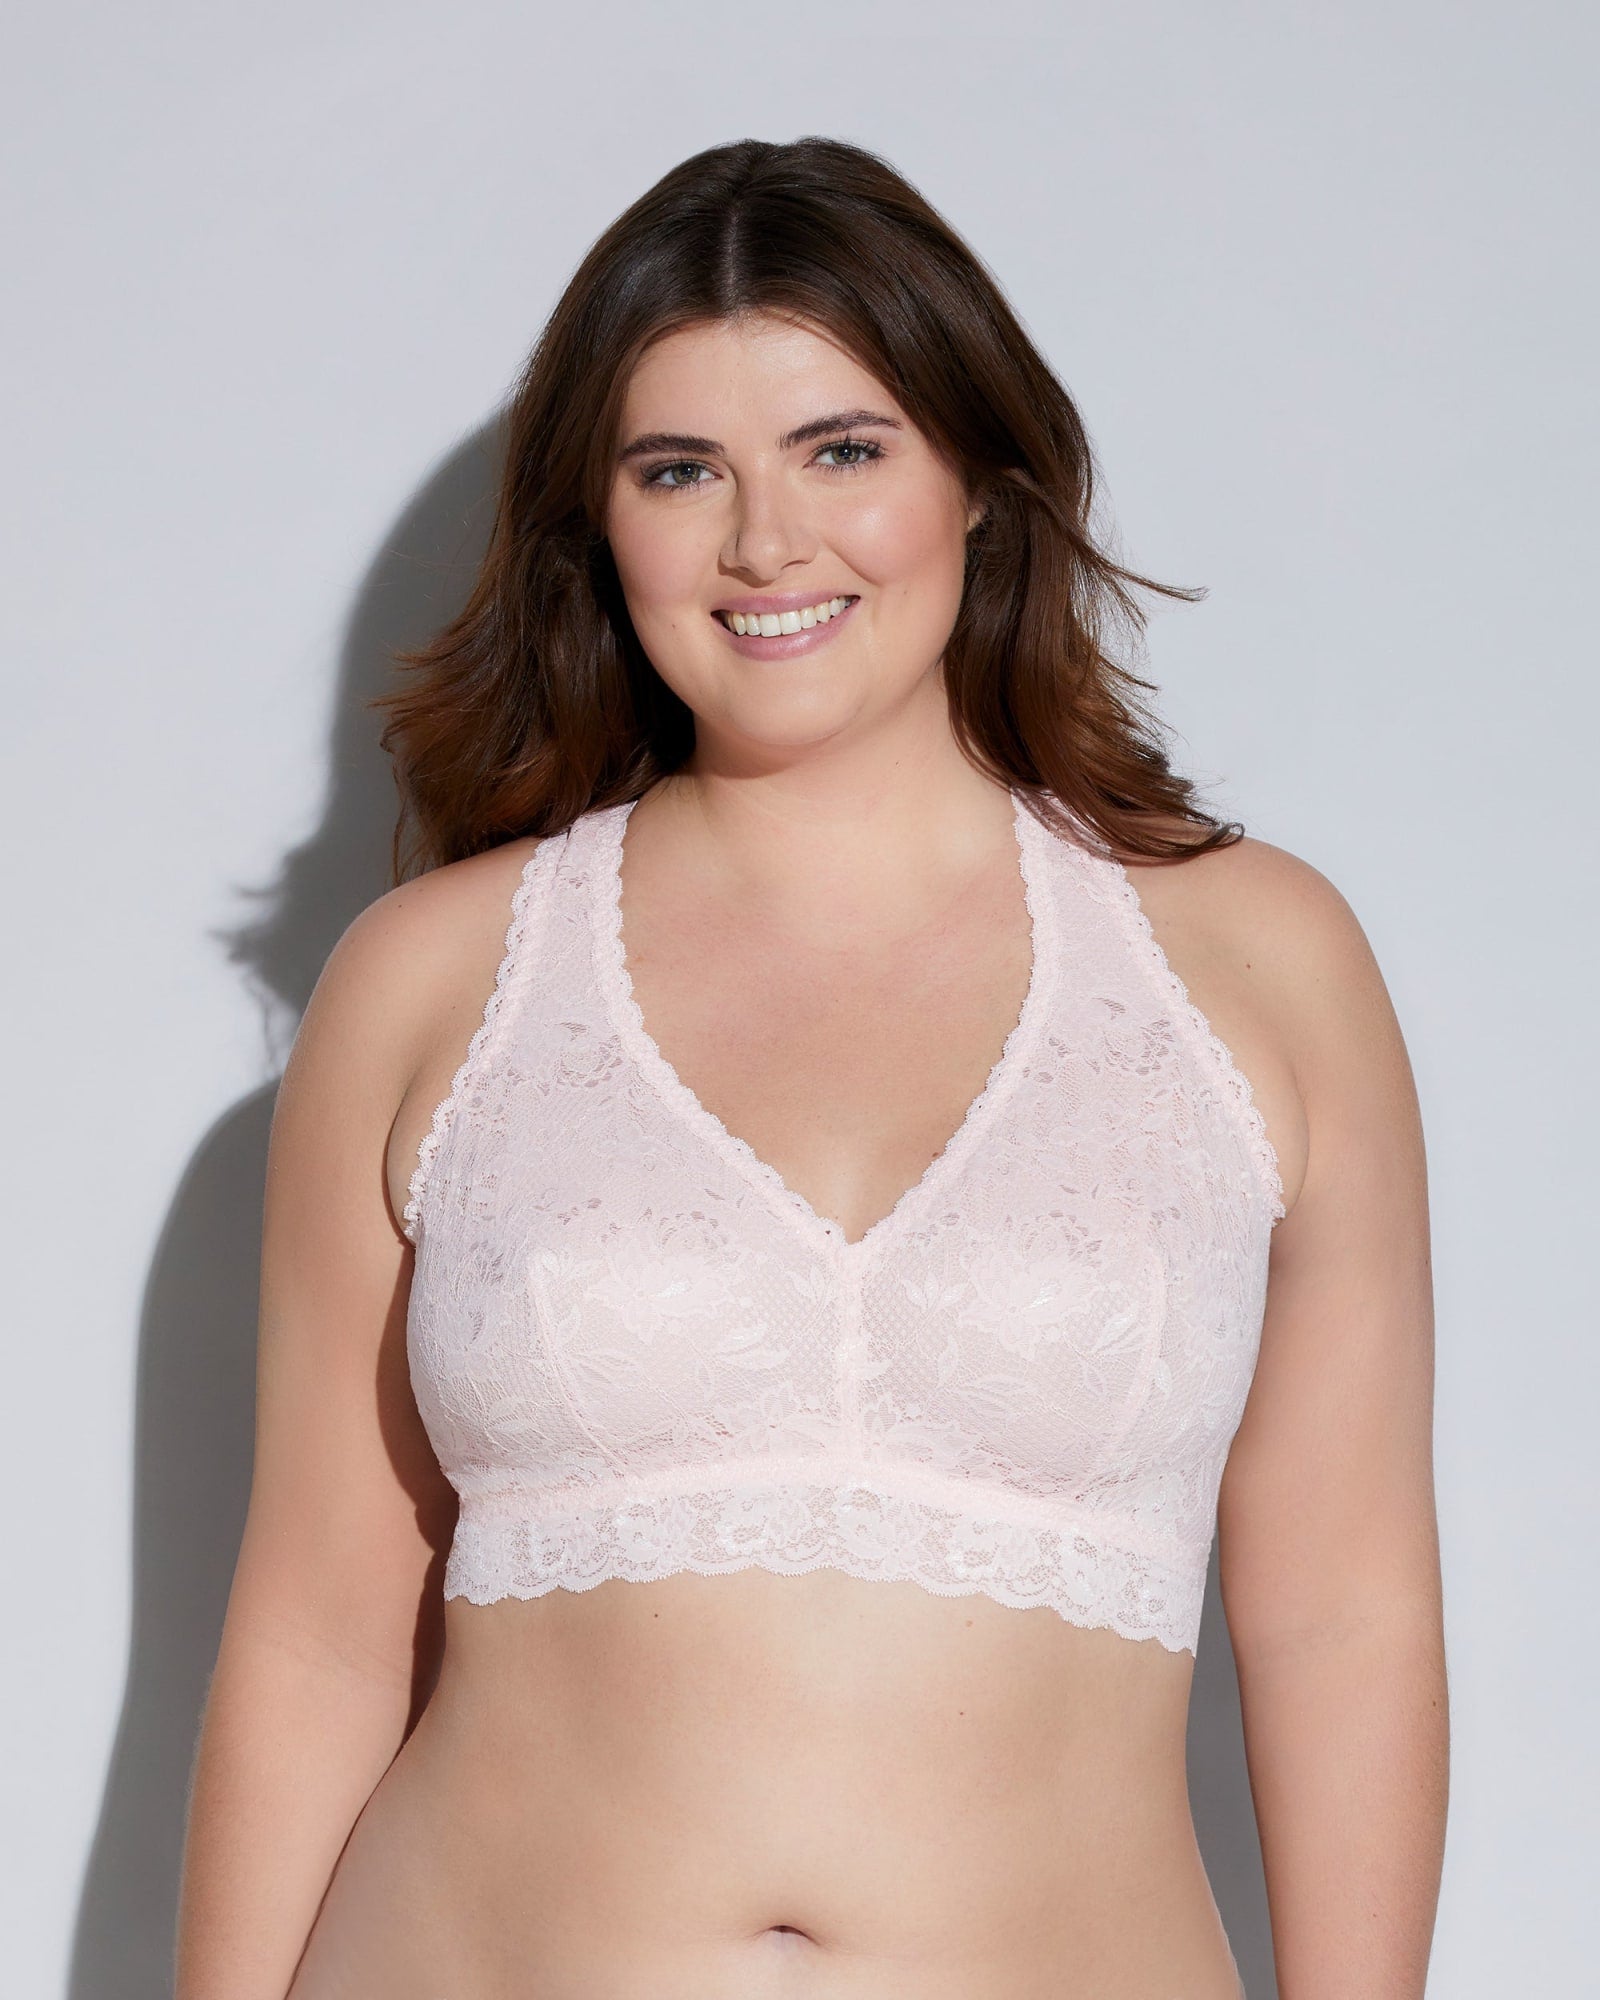  Sexy Lace Bralette Full Cup Plus Size Bras 36 38 40 BCD (Bands  Size : 38 EU, Color : 1324-Dark Pink) : Clothing, Shoes & Jewelry